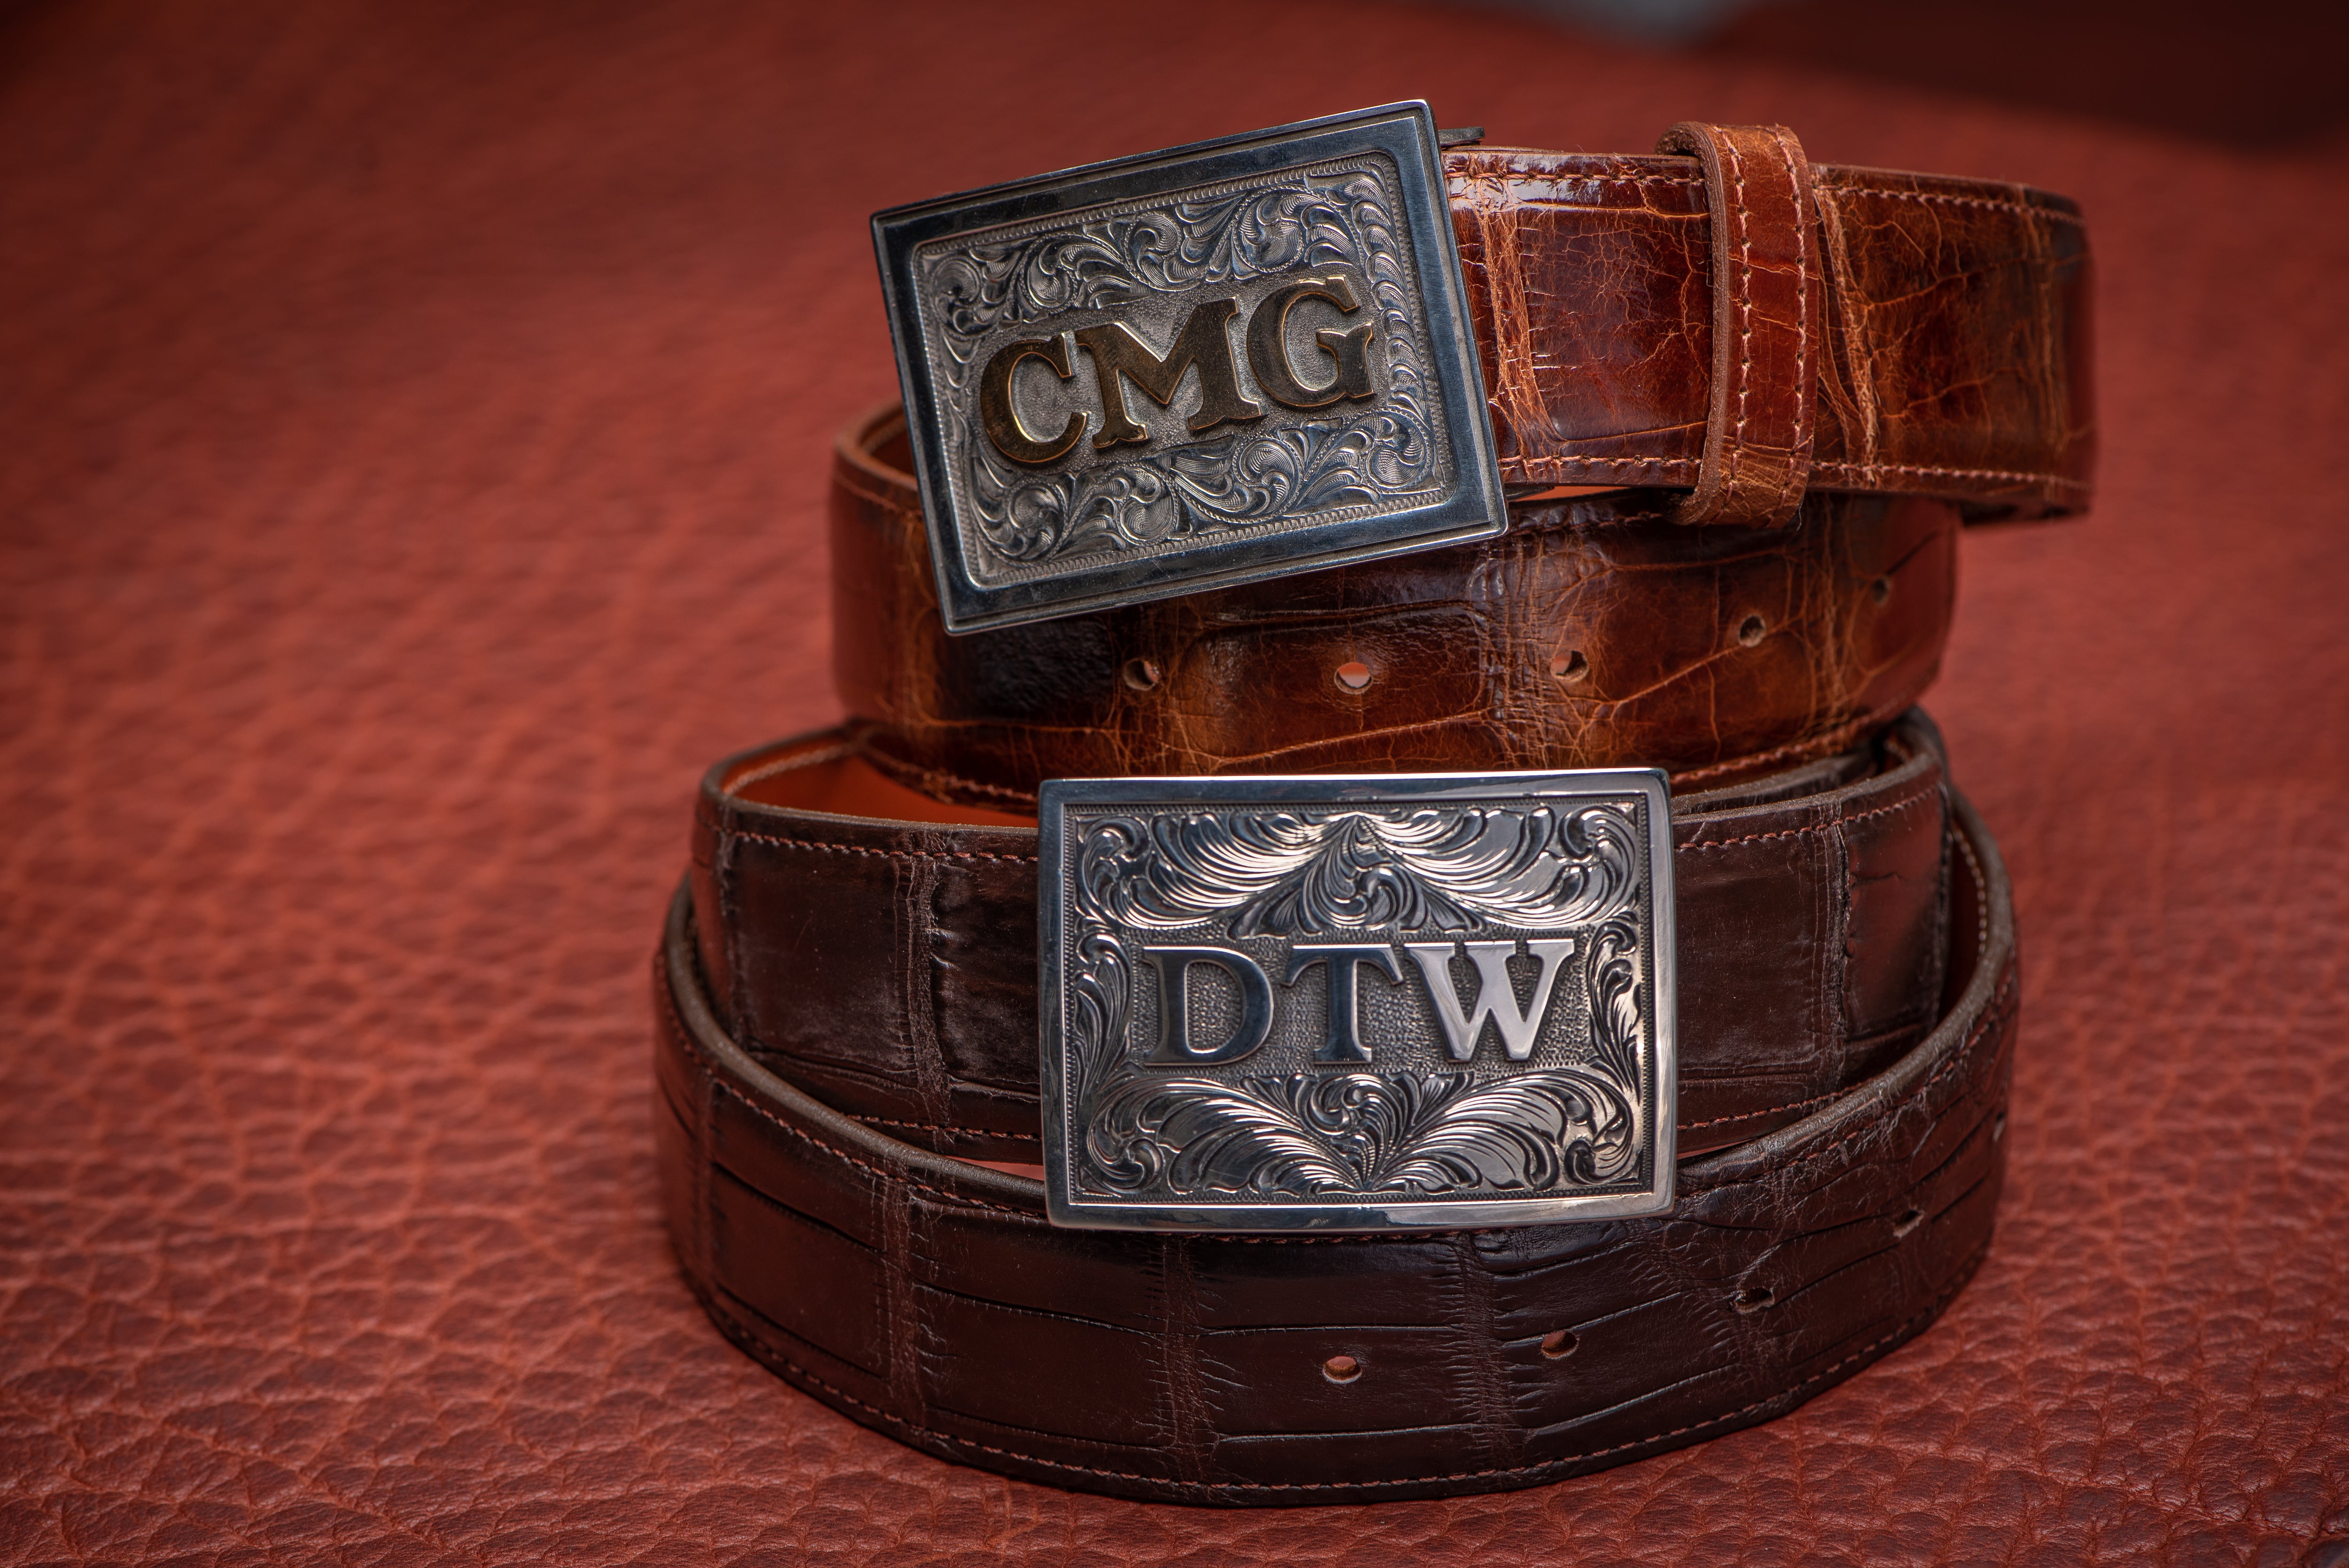 Hand Forged Iron Buckles - Leather Belt and Buckle - Large Round Belt Buckle